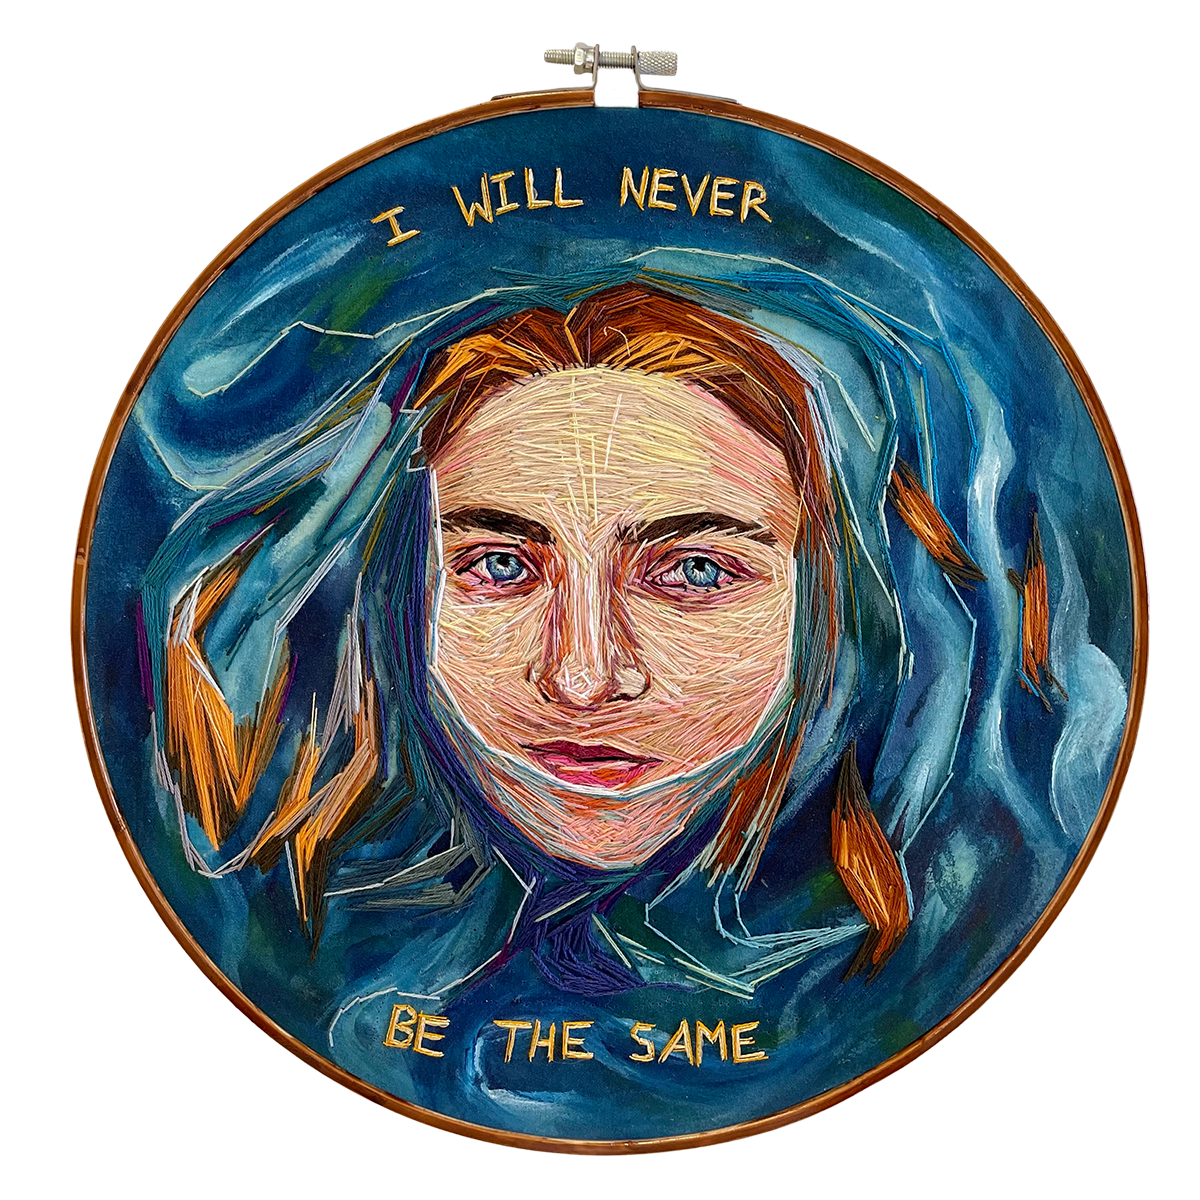 I Will Never Be the Same Hand embroidery and acrylic paint on cotton 10.5” diameter $1650